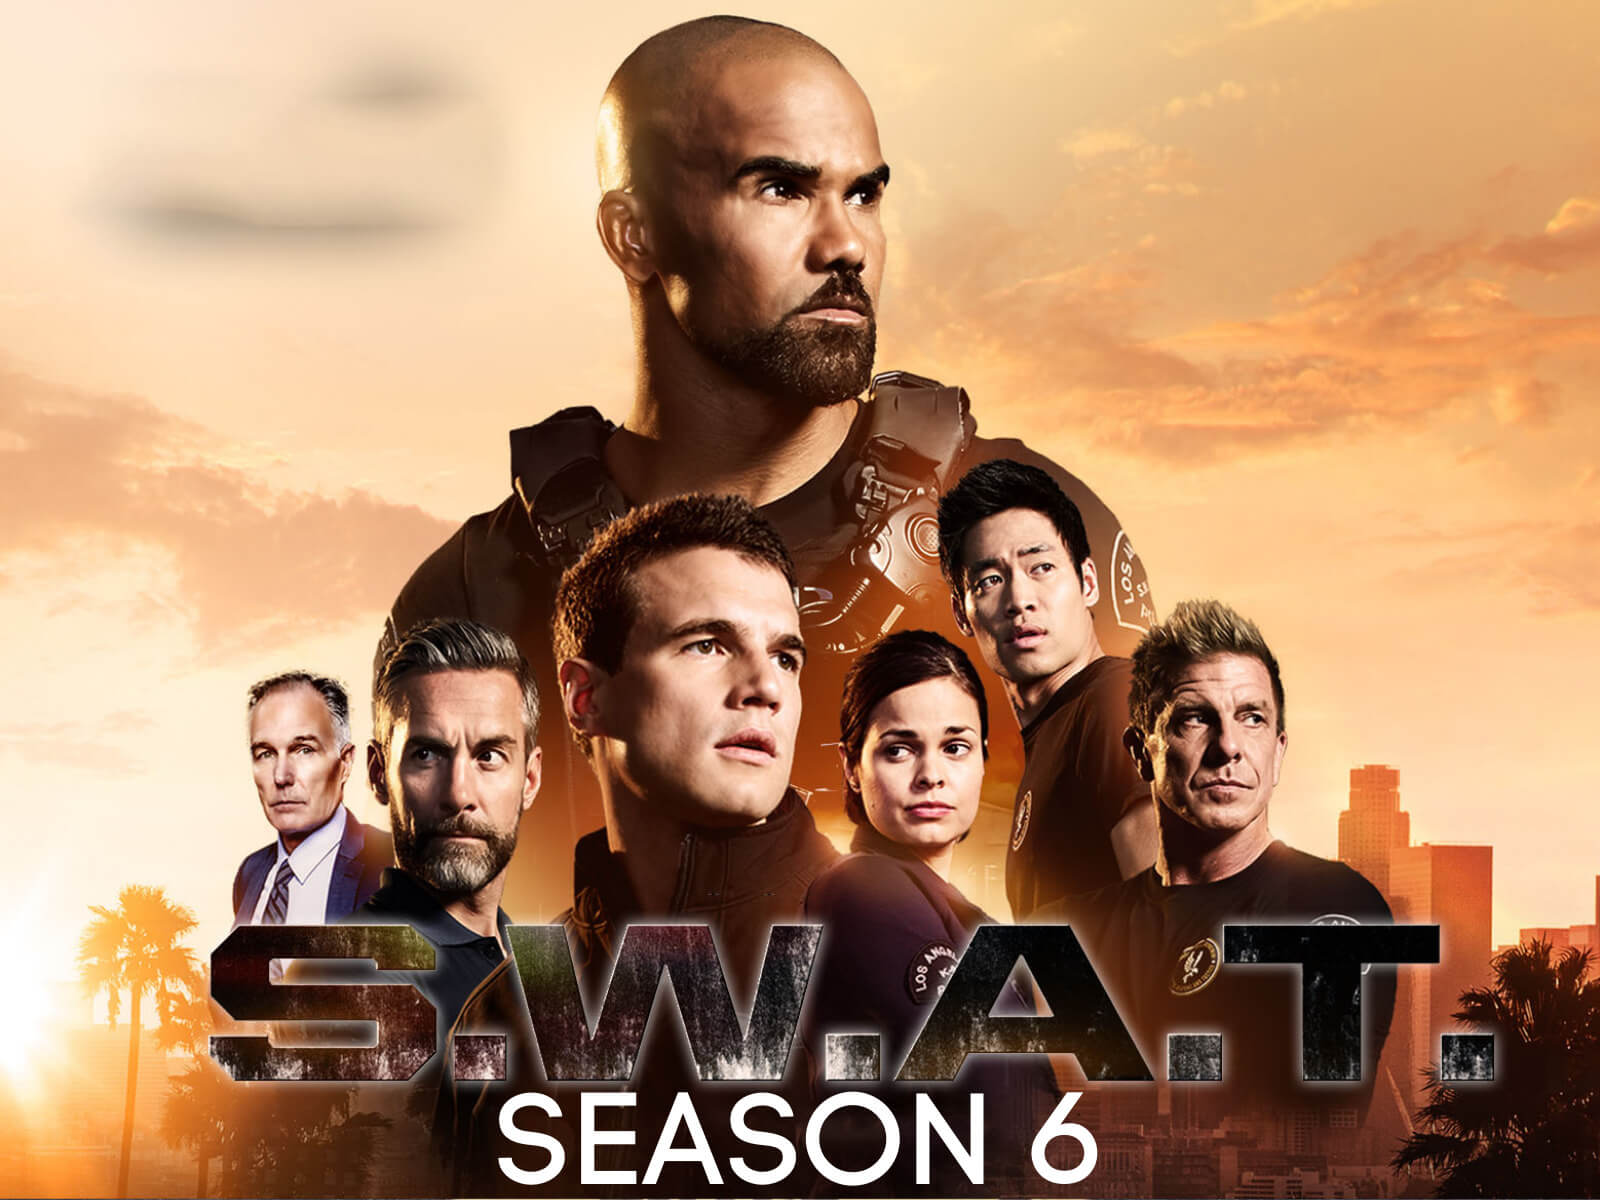 Is The SWAT available for free to watch